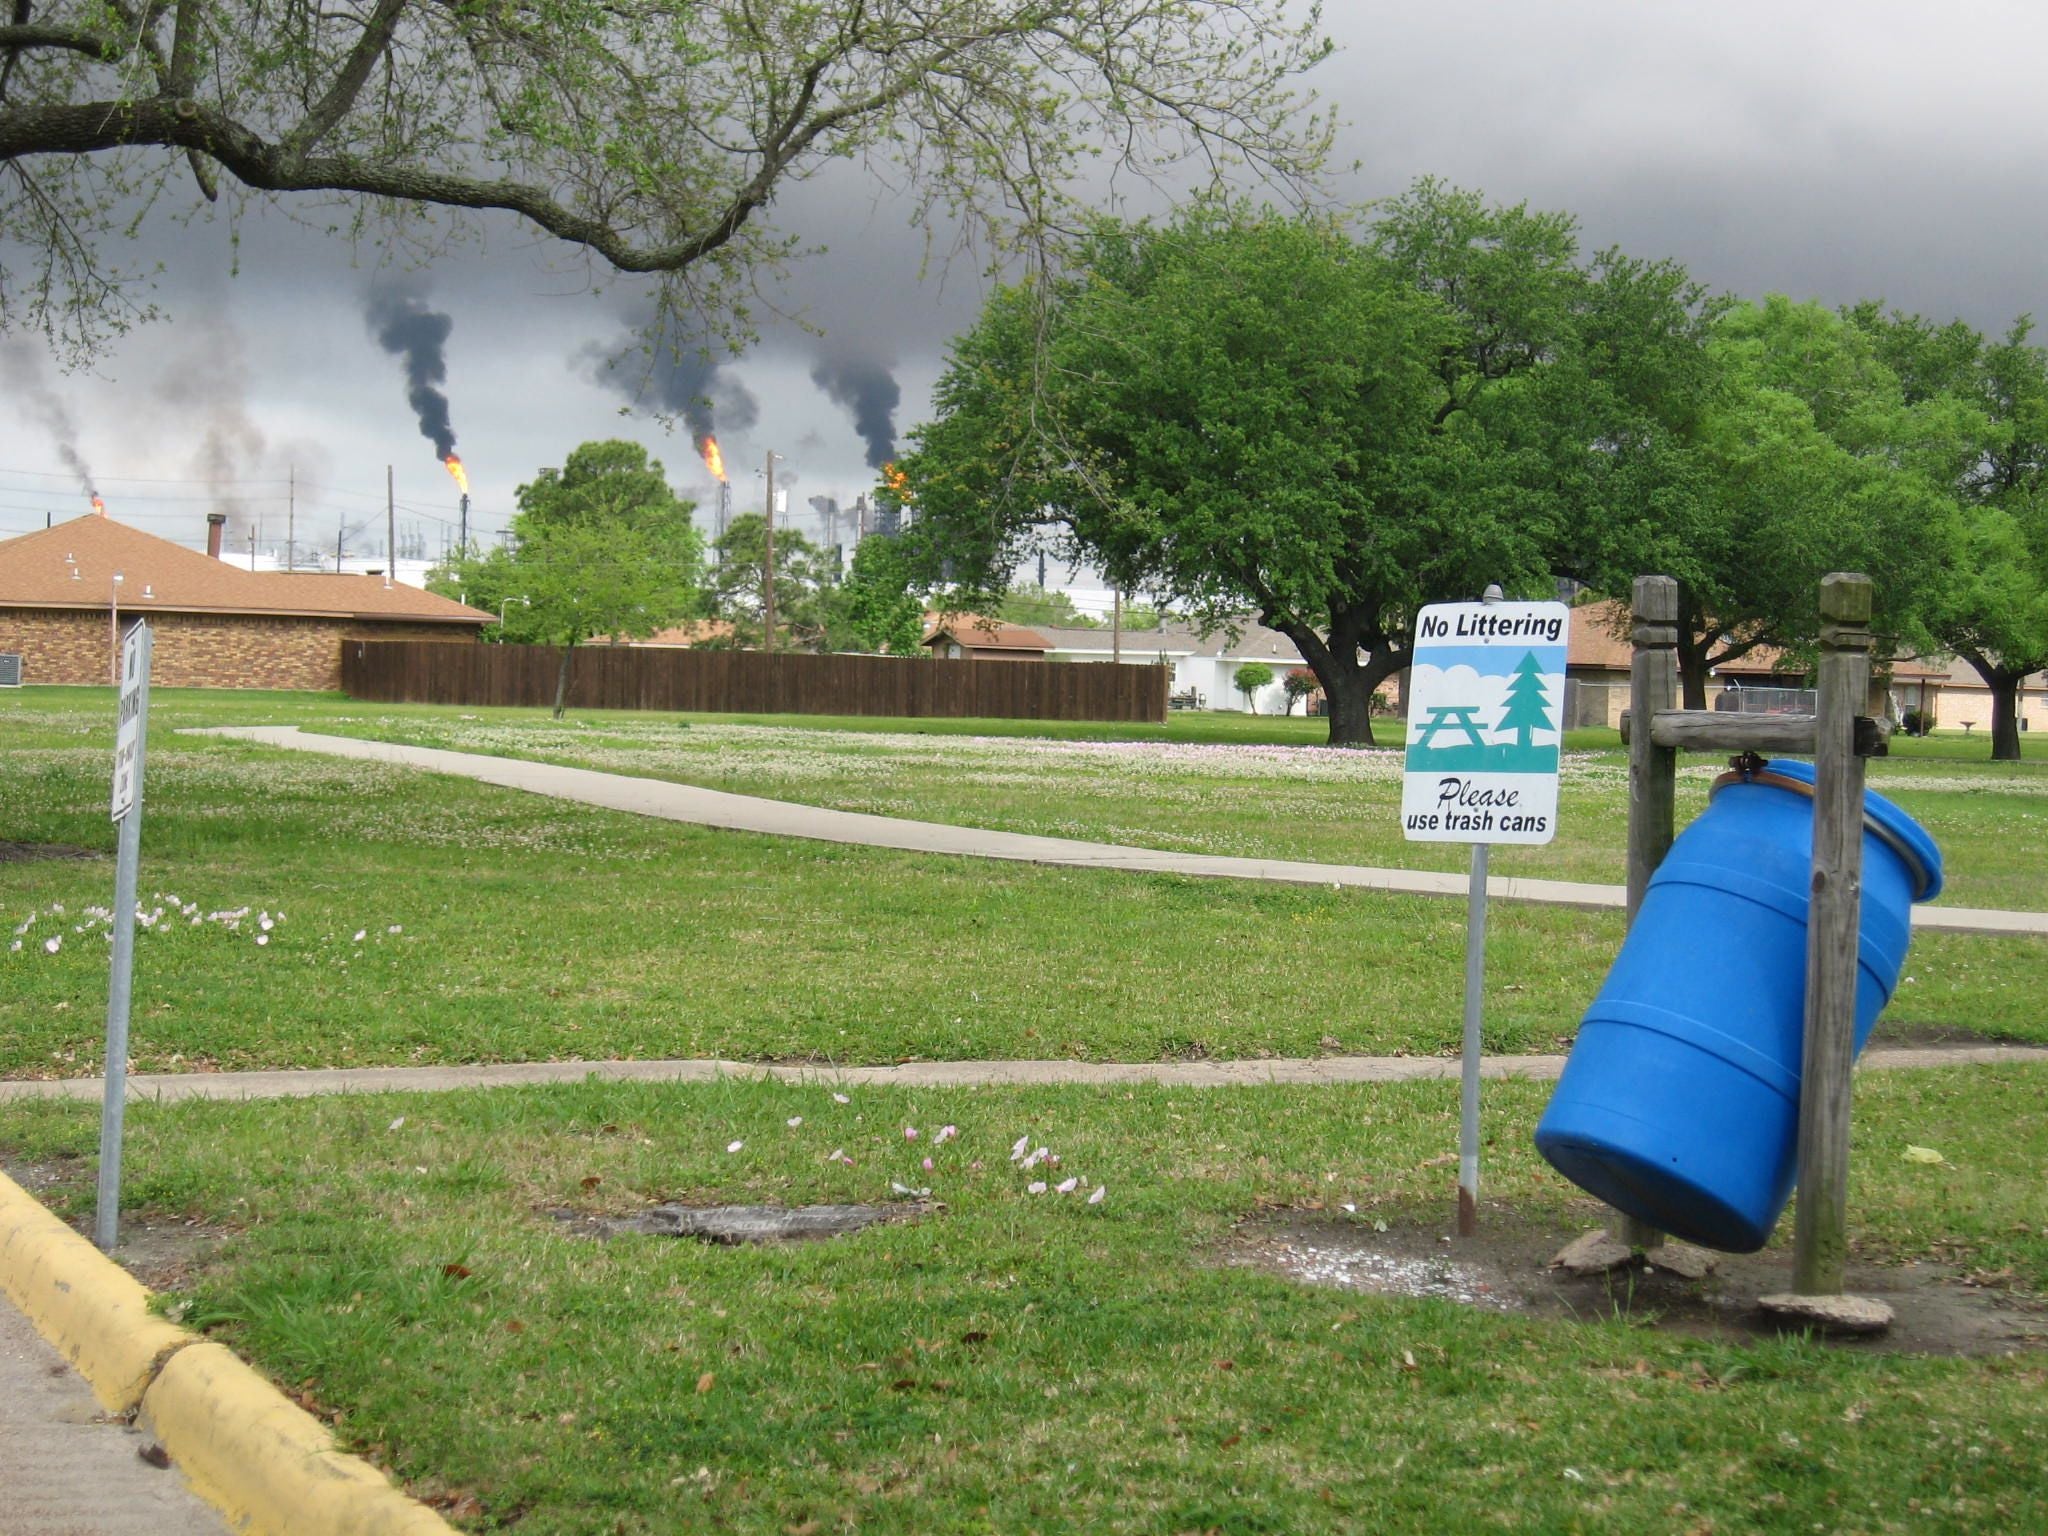 Malfunctions cause major pollution events like this one in the community of the west side of Port Arthur, Texas.